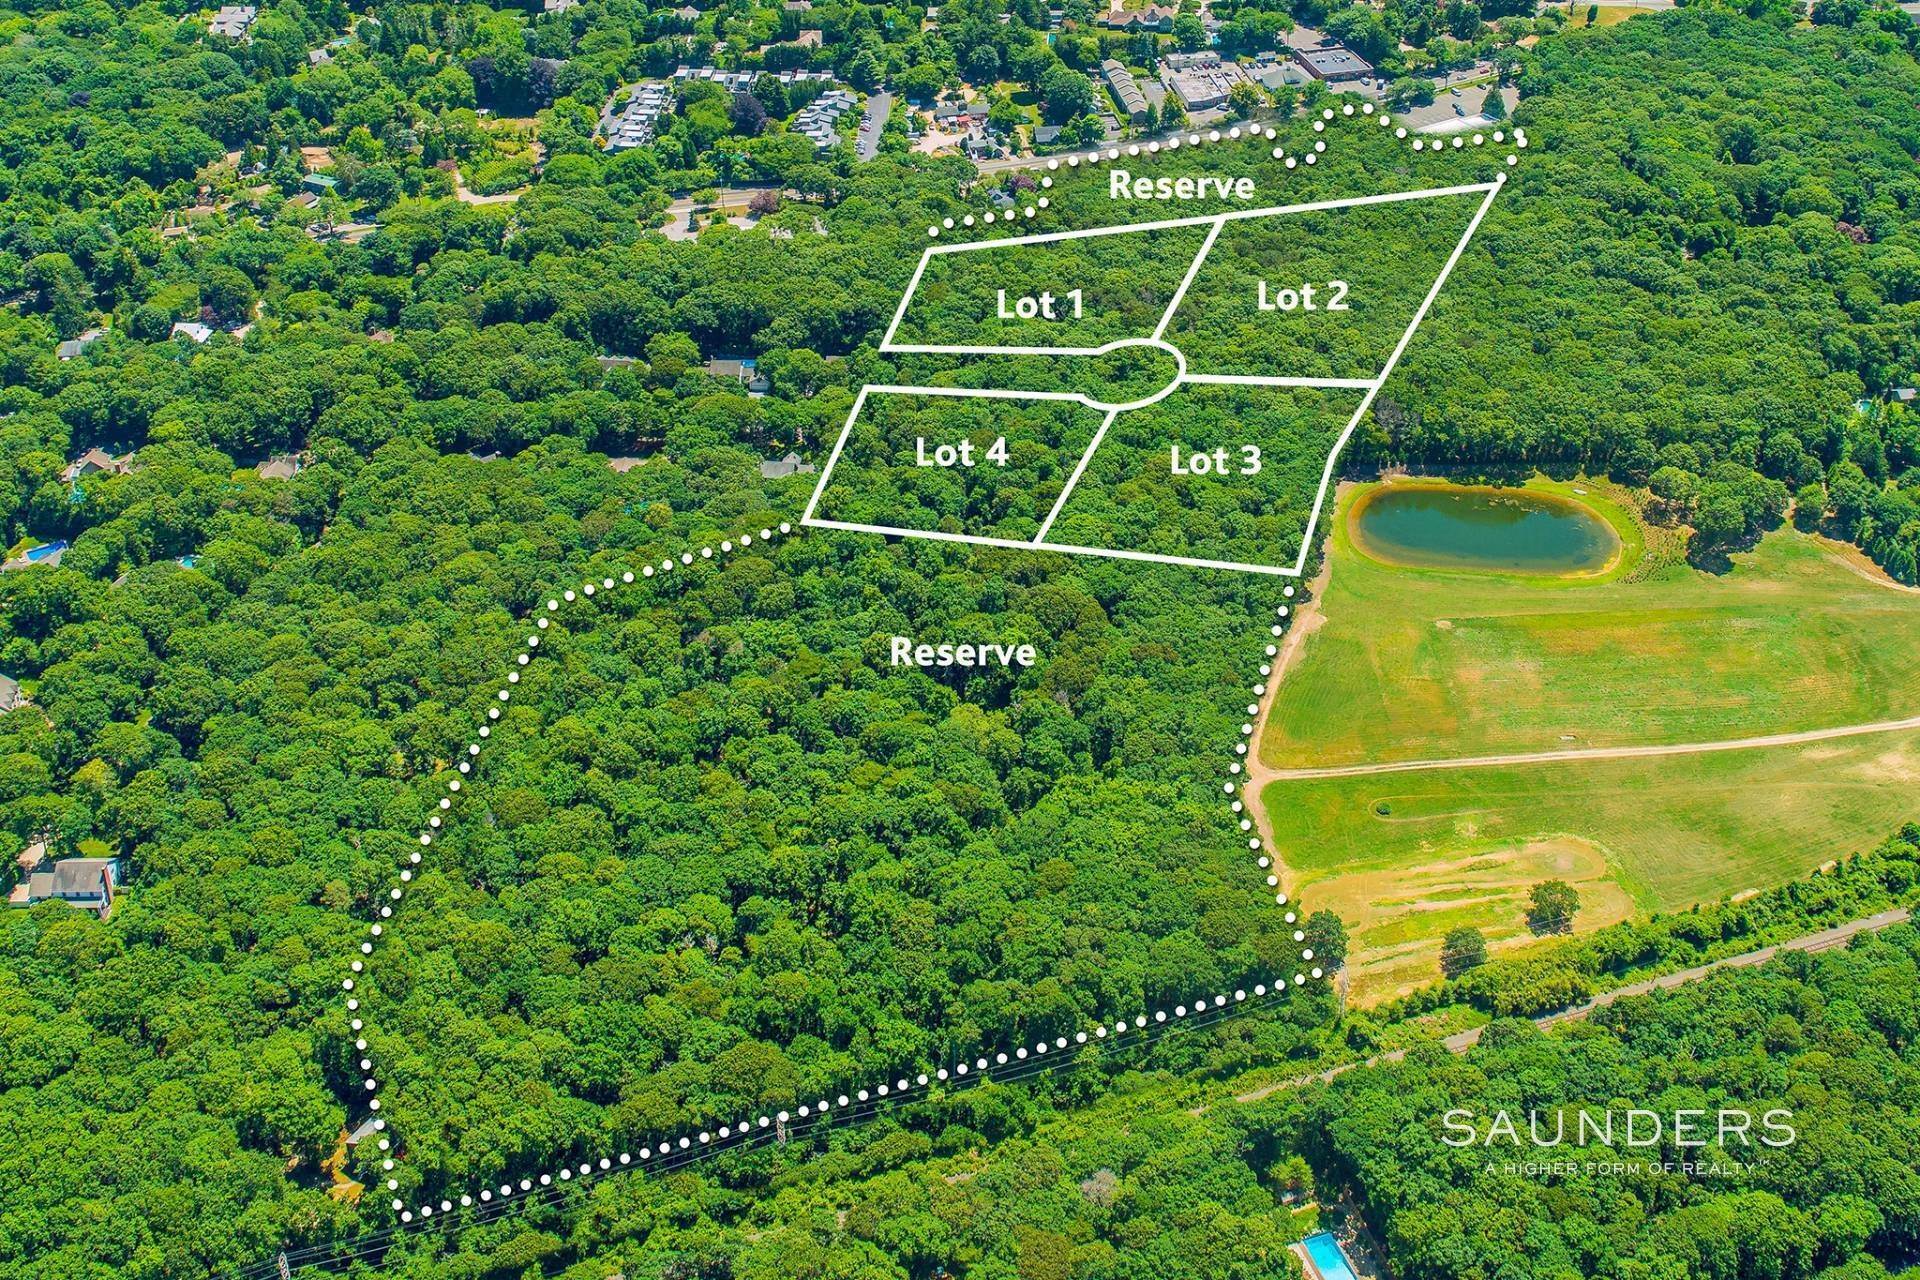 2. Land for Sale at Luxury Development Opportunity Holly Place, Lots 1 - 4, East Hampton, NY 11937